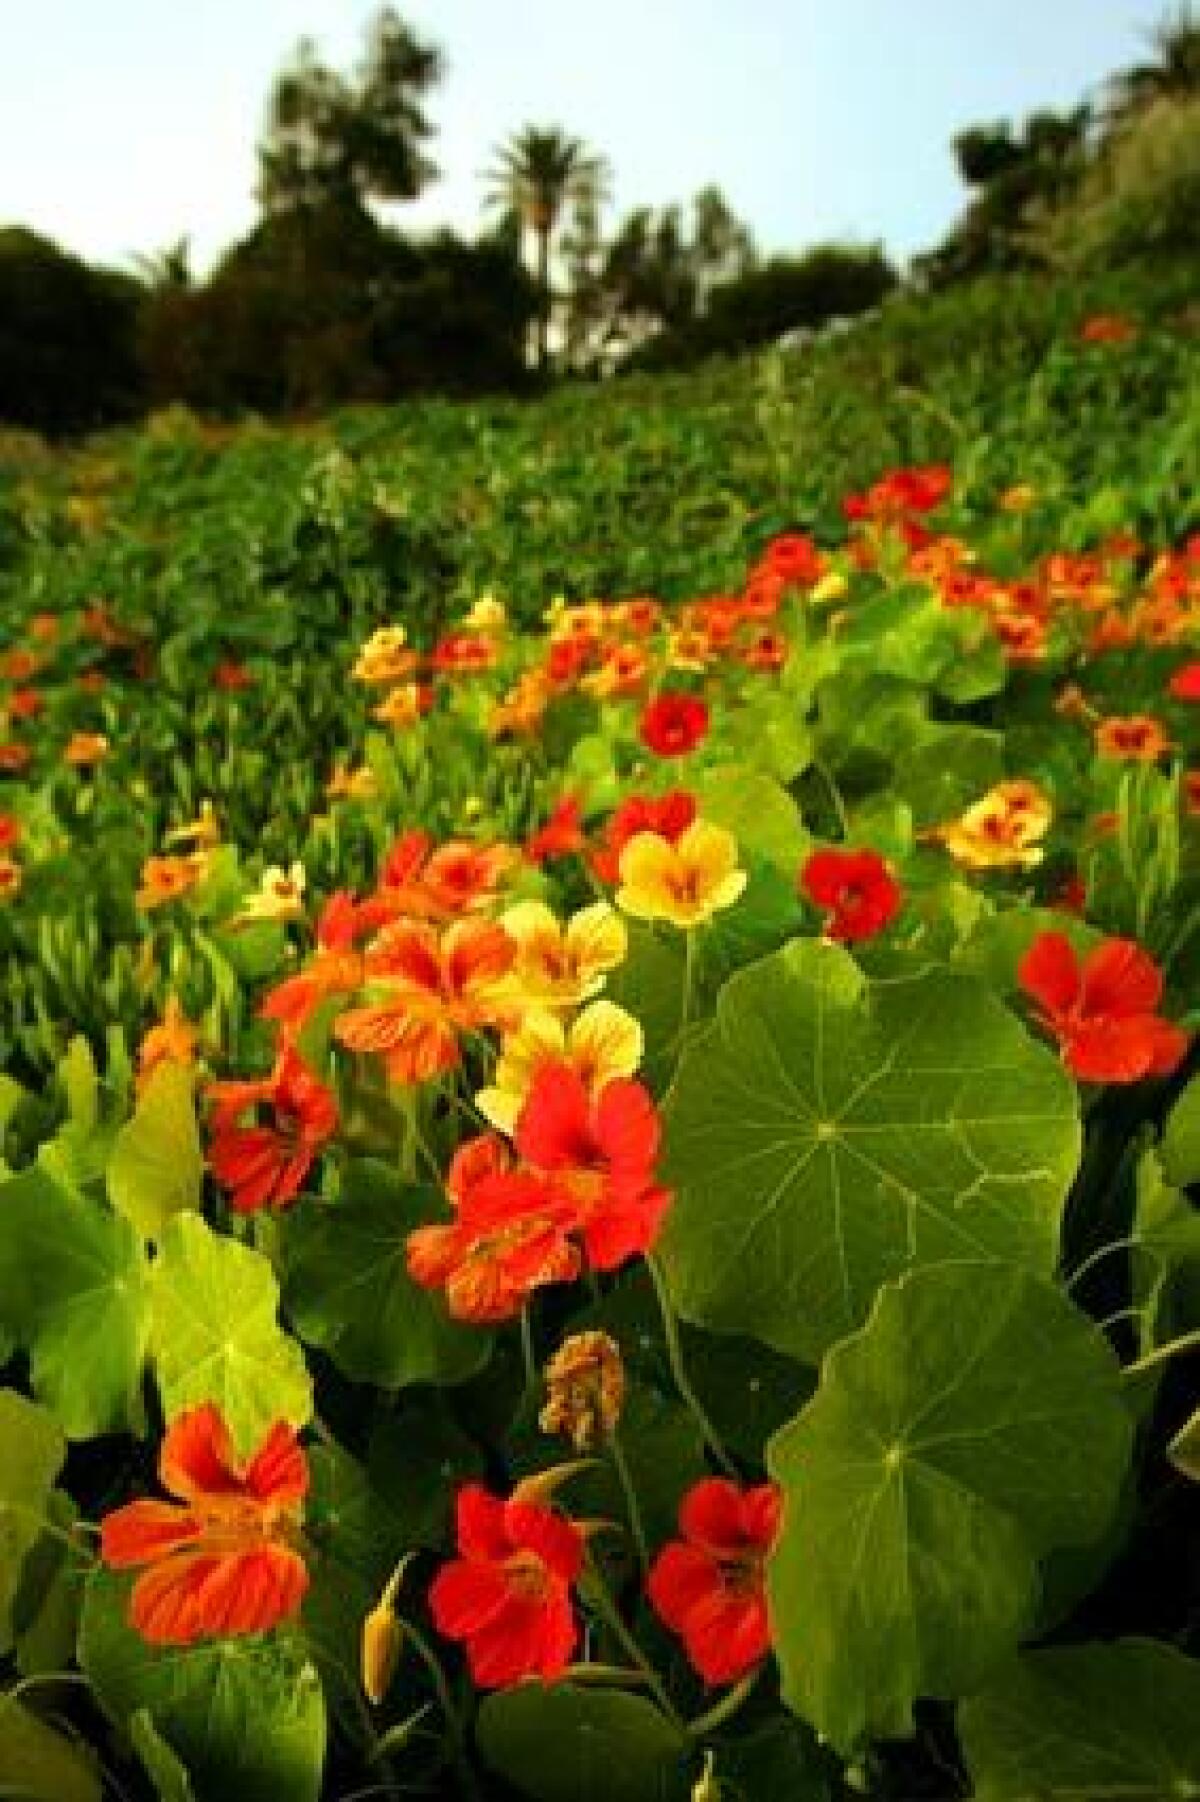 Many gardeners like nasturtiums because they are colorful and can be grown easily from seed, but the plants can spread fast. Here, they take over the roadside along Pacific Coast Highway.